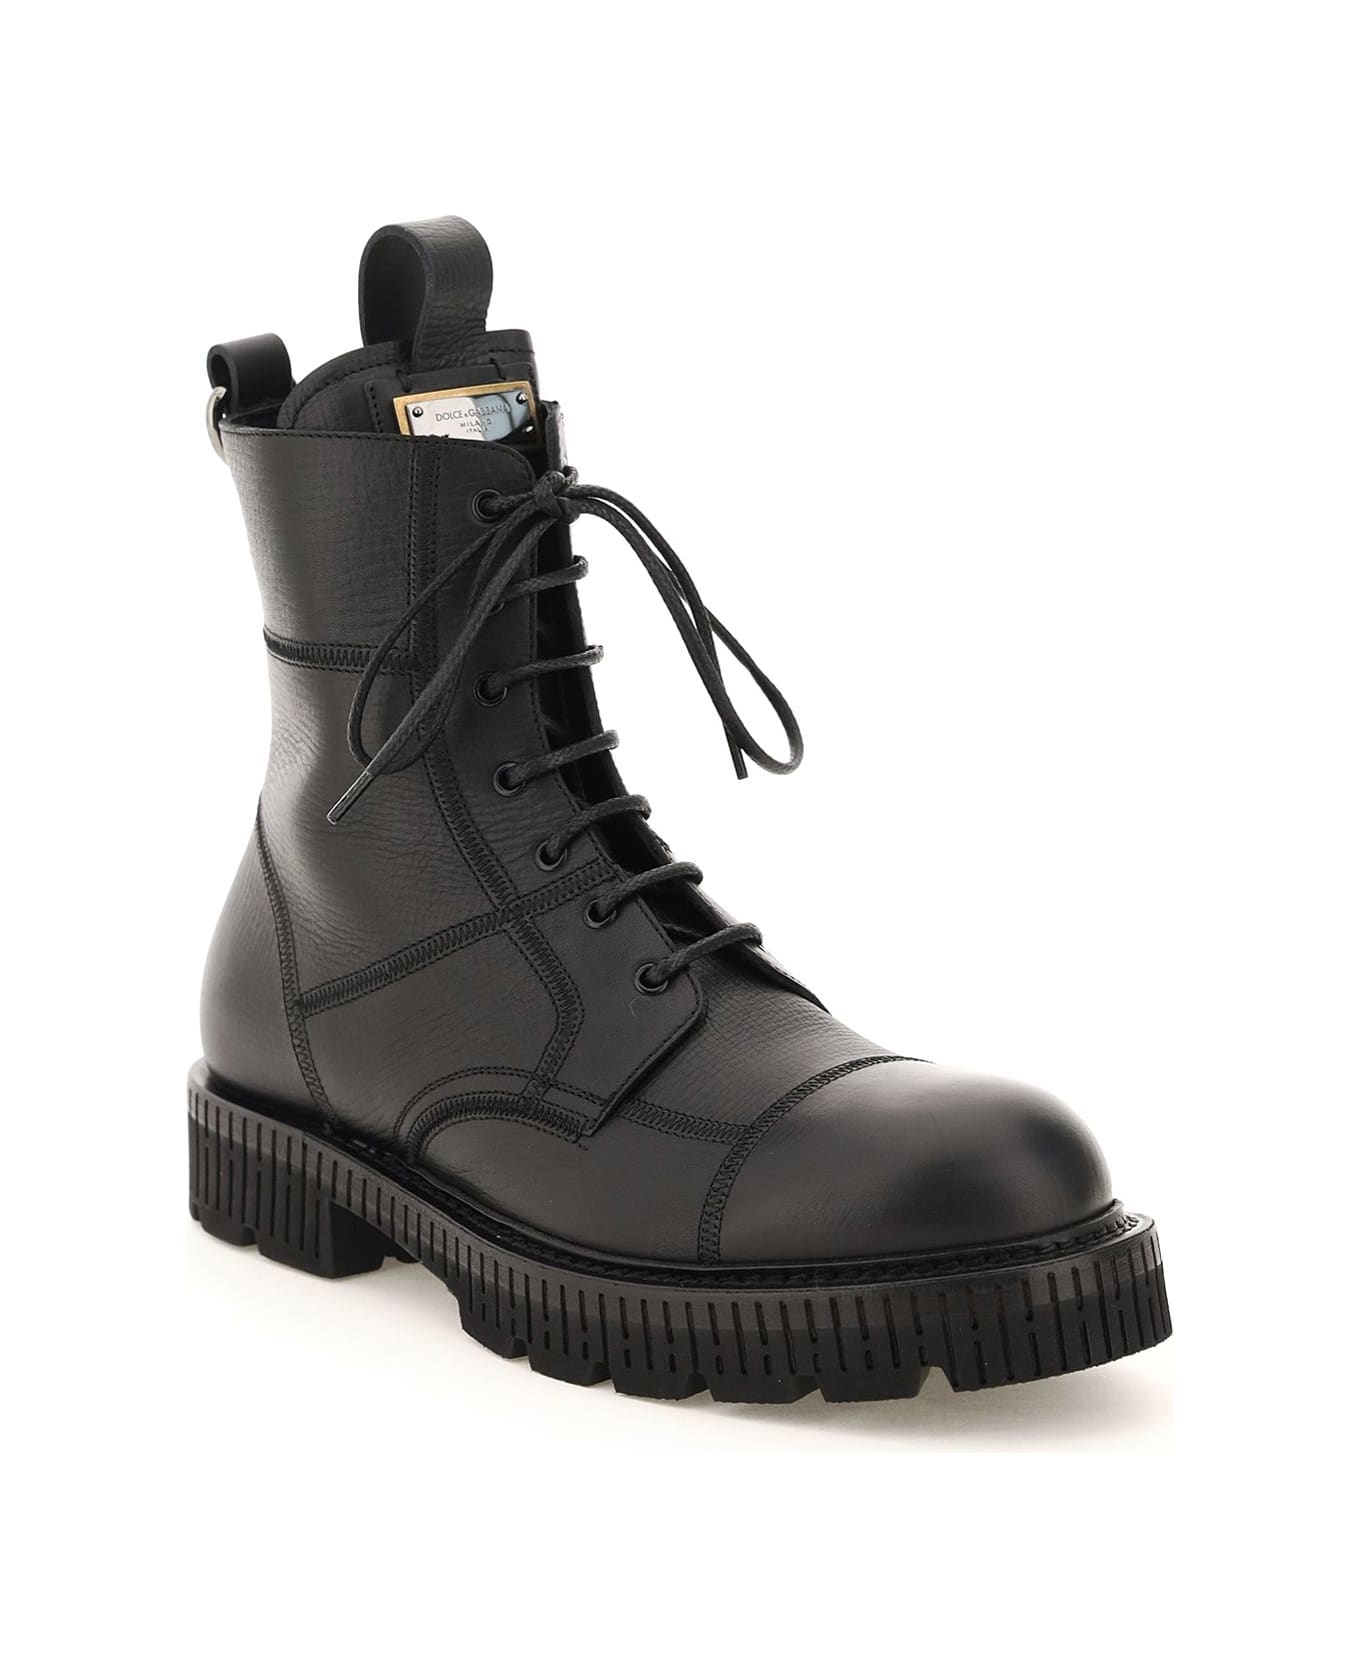 Dolce & Gabbana Leather Lace Up Boots - Black ブーツ